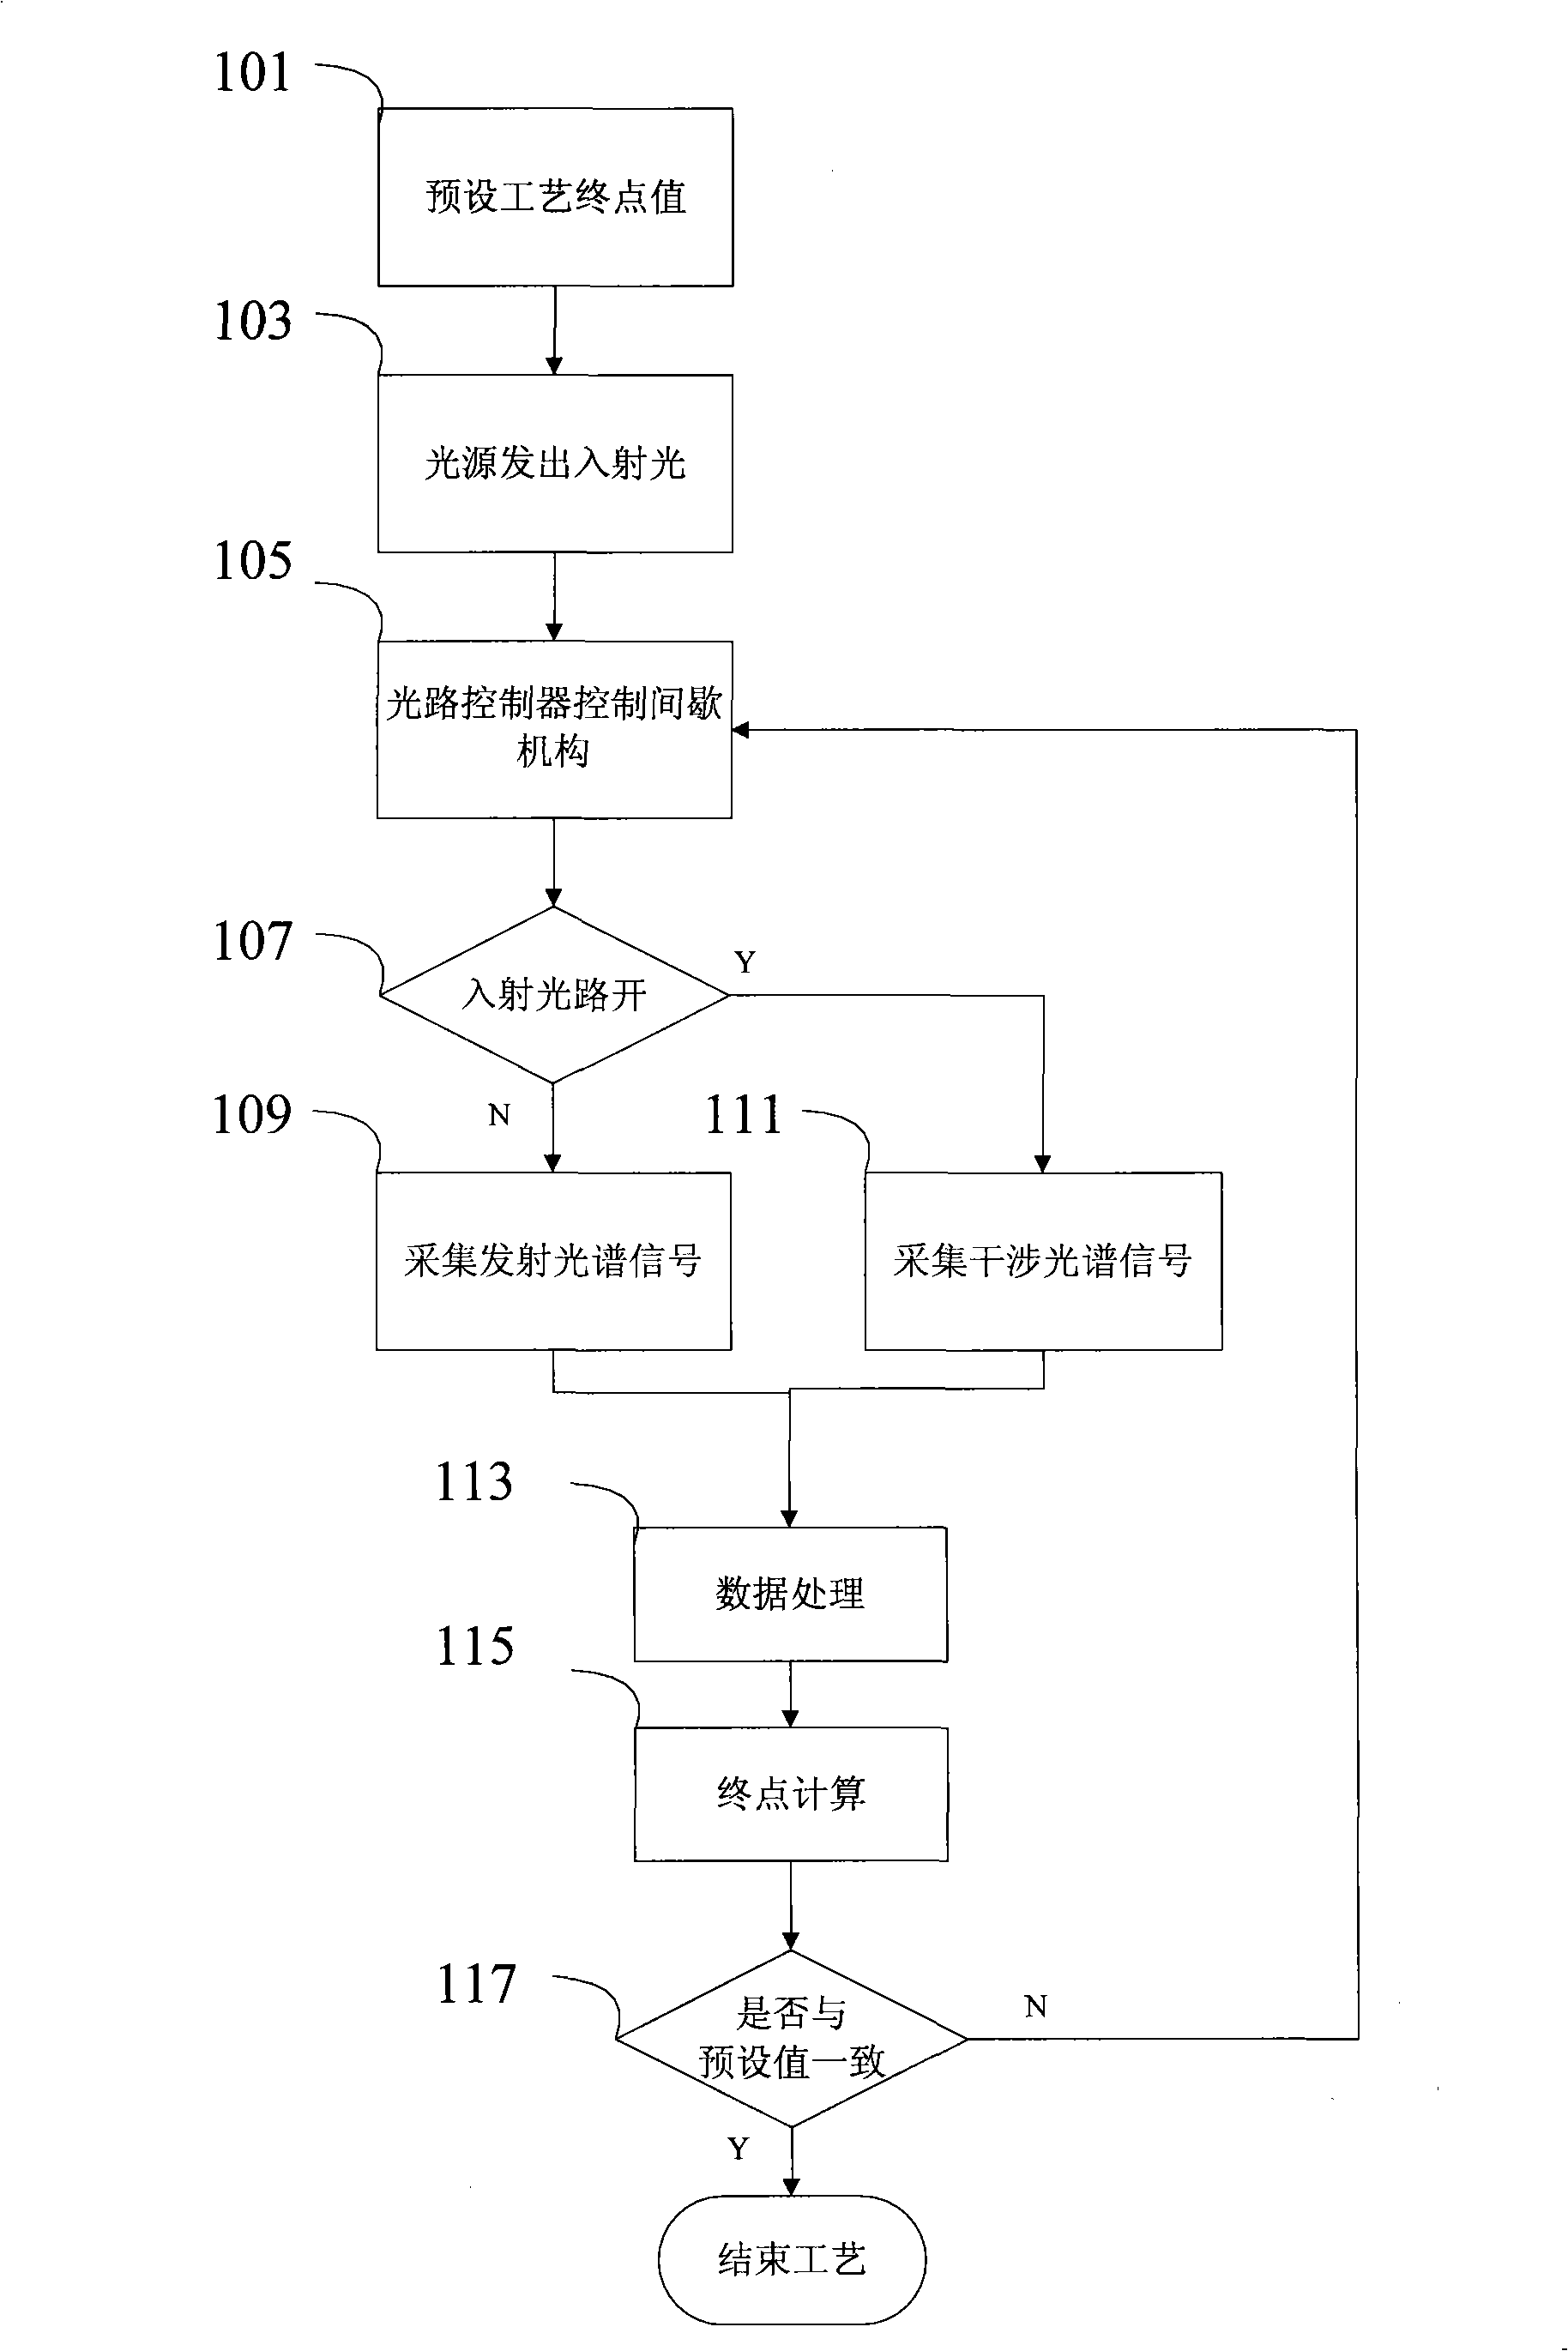 System and method for monitoring semiconductor processing technique